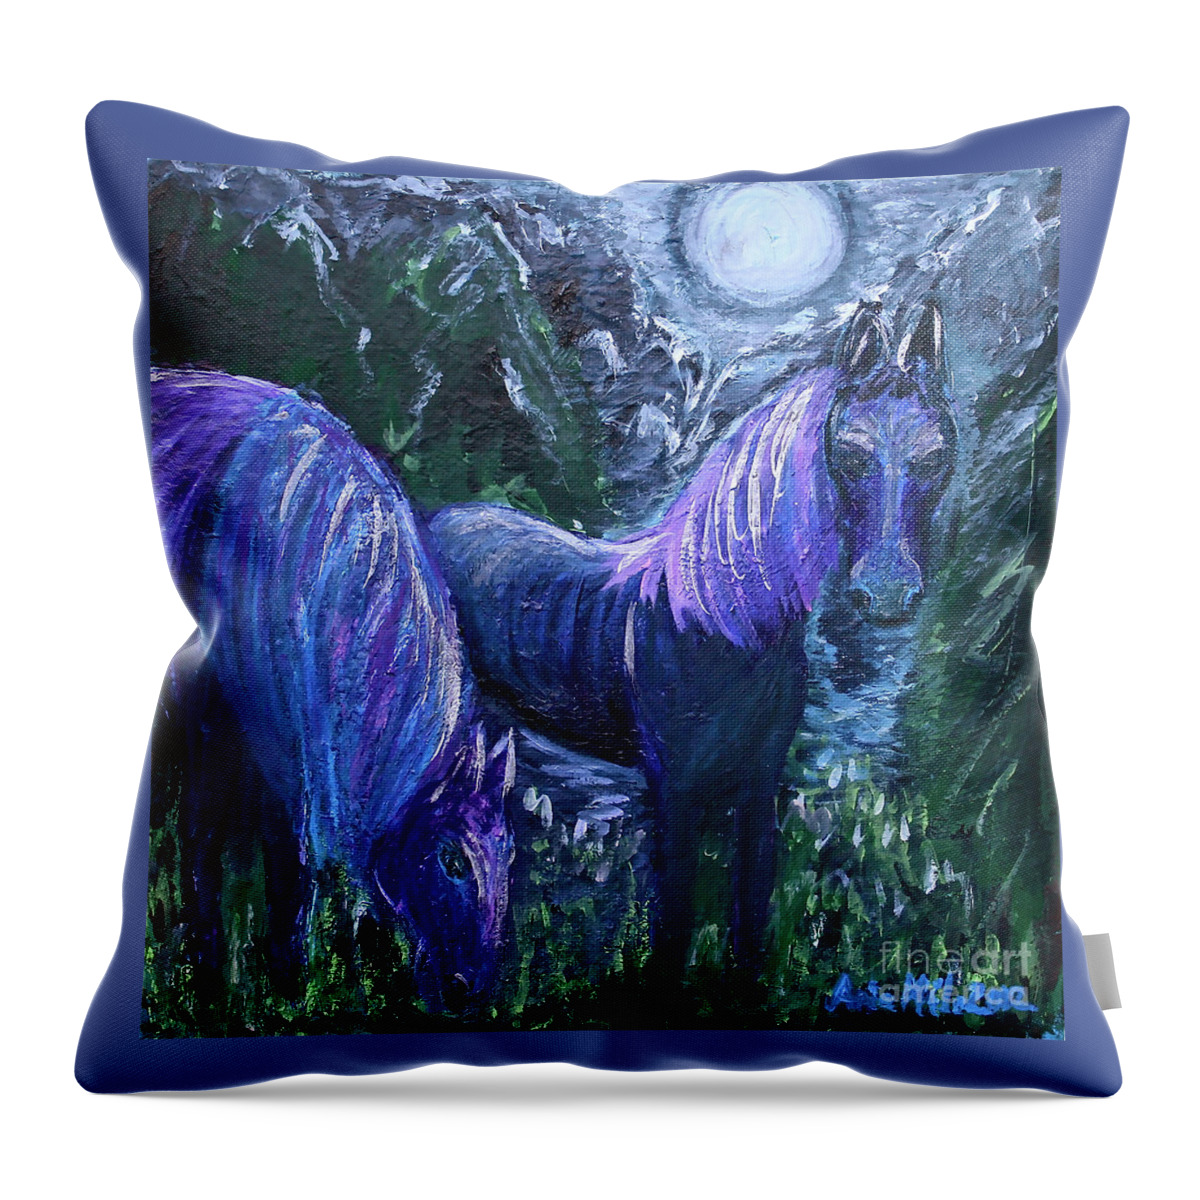 Horses Throw Pillow featuring the painting Midnight Feed by Ania M Milo